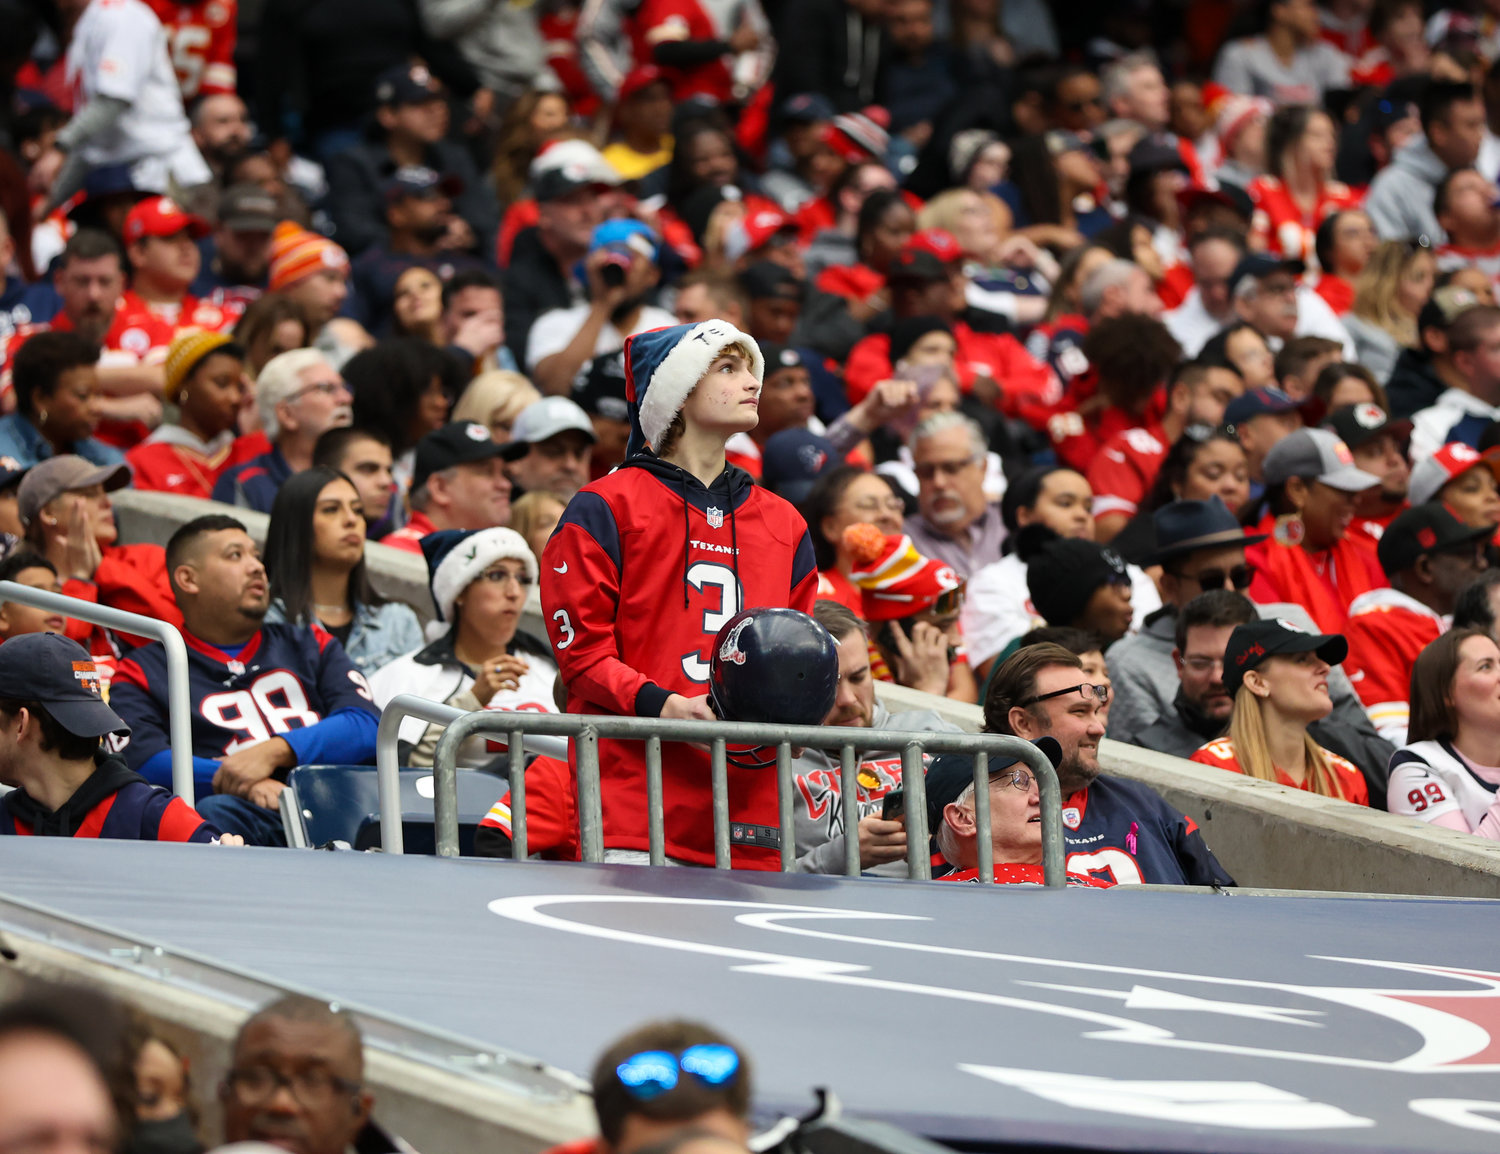 A Houston Texans looks on during an NFL game between the Texans and the Chiefs on Dec. 18, 2022, in Houston. The Chiefs won, 30-24, in overtime.